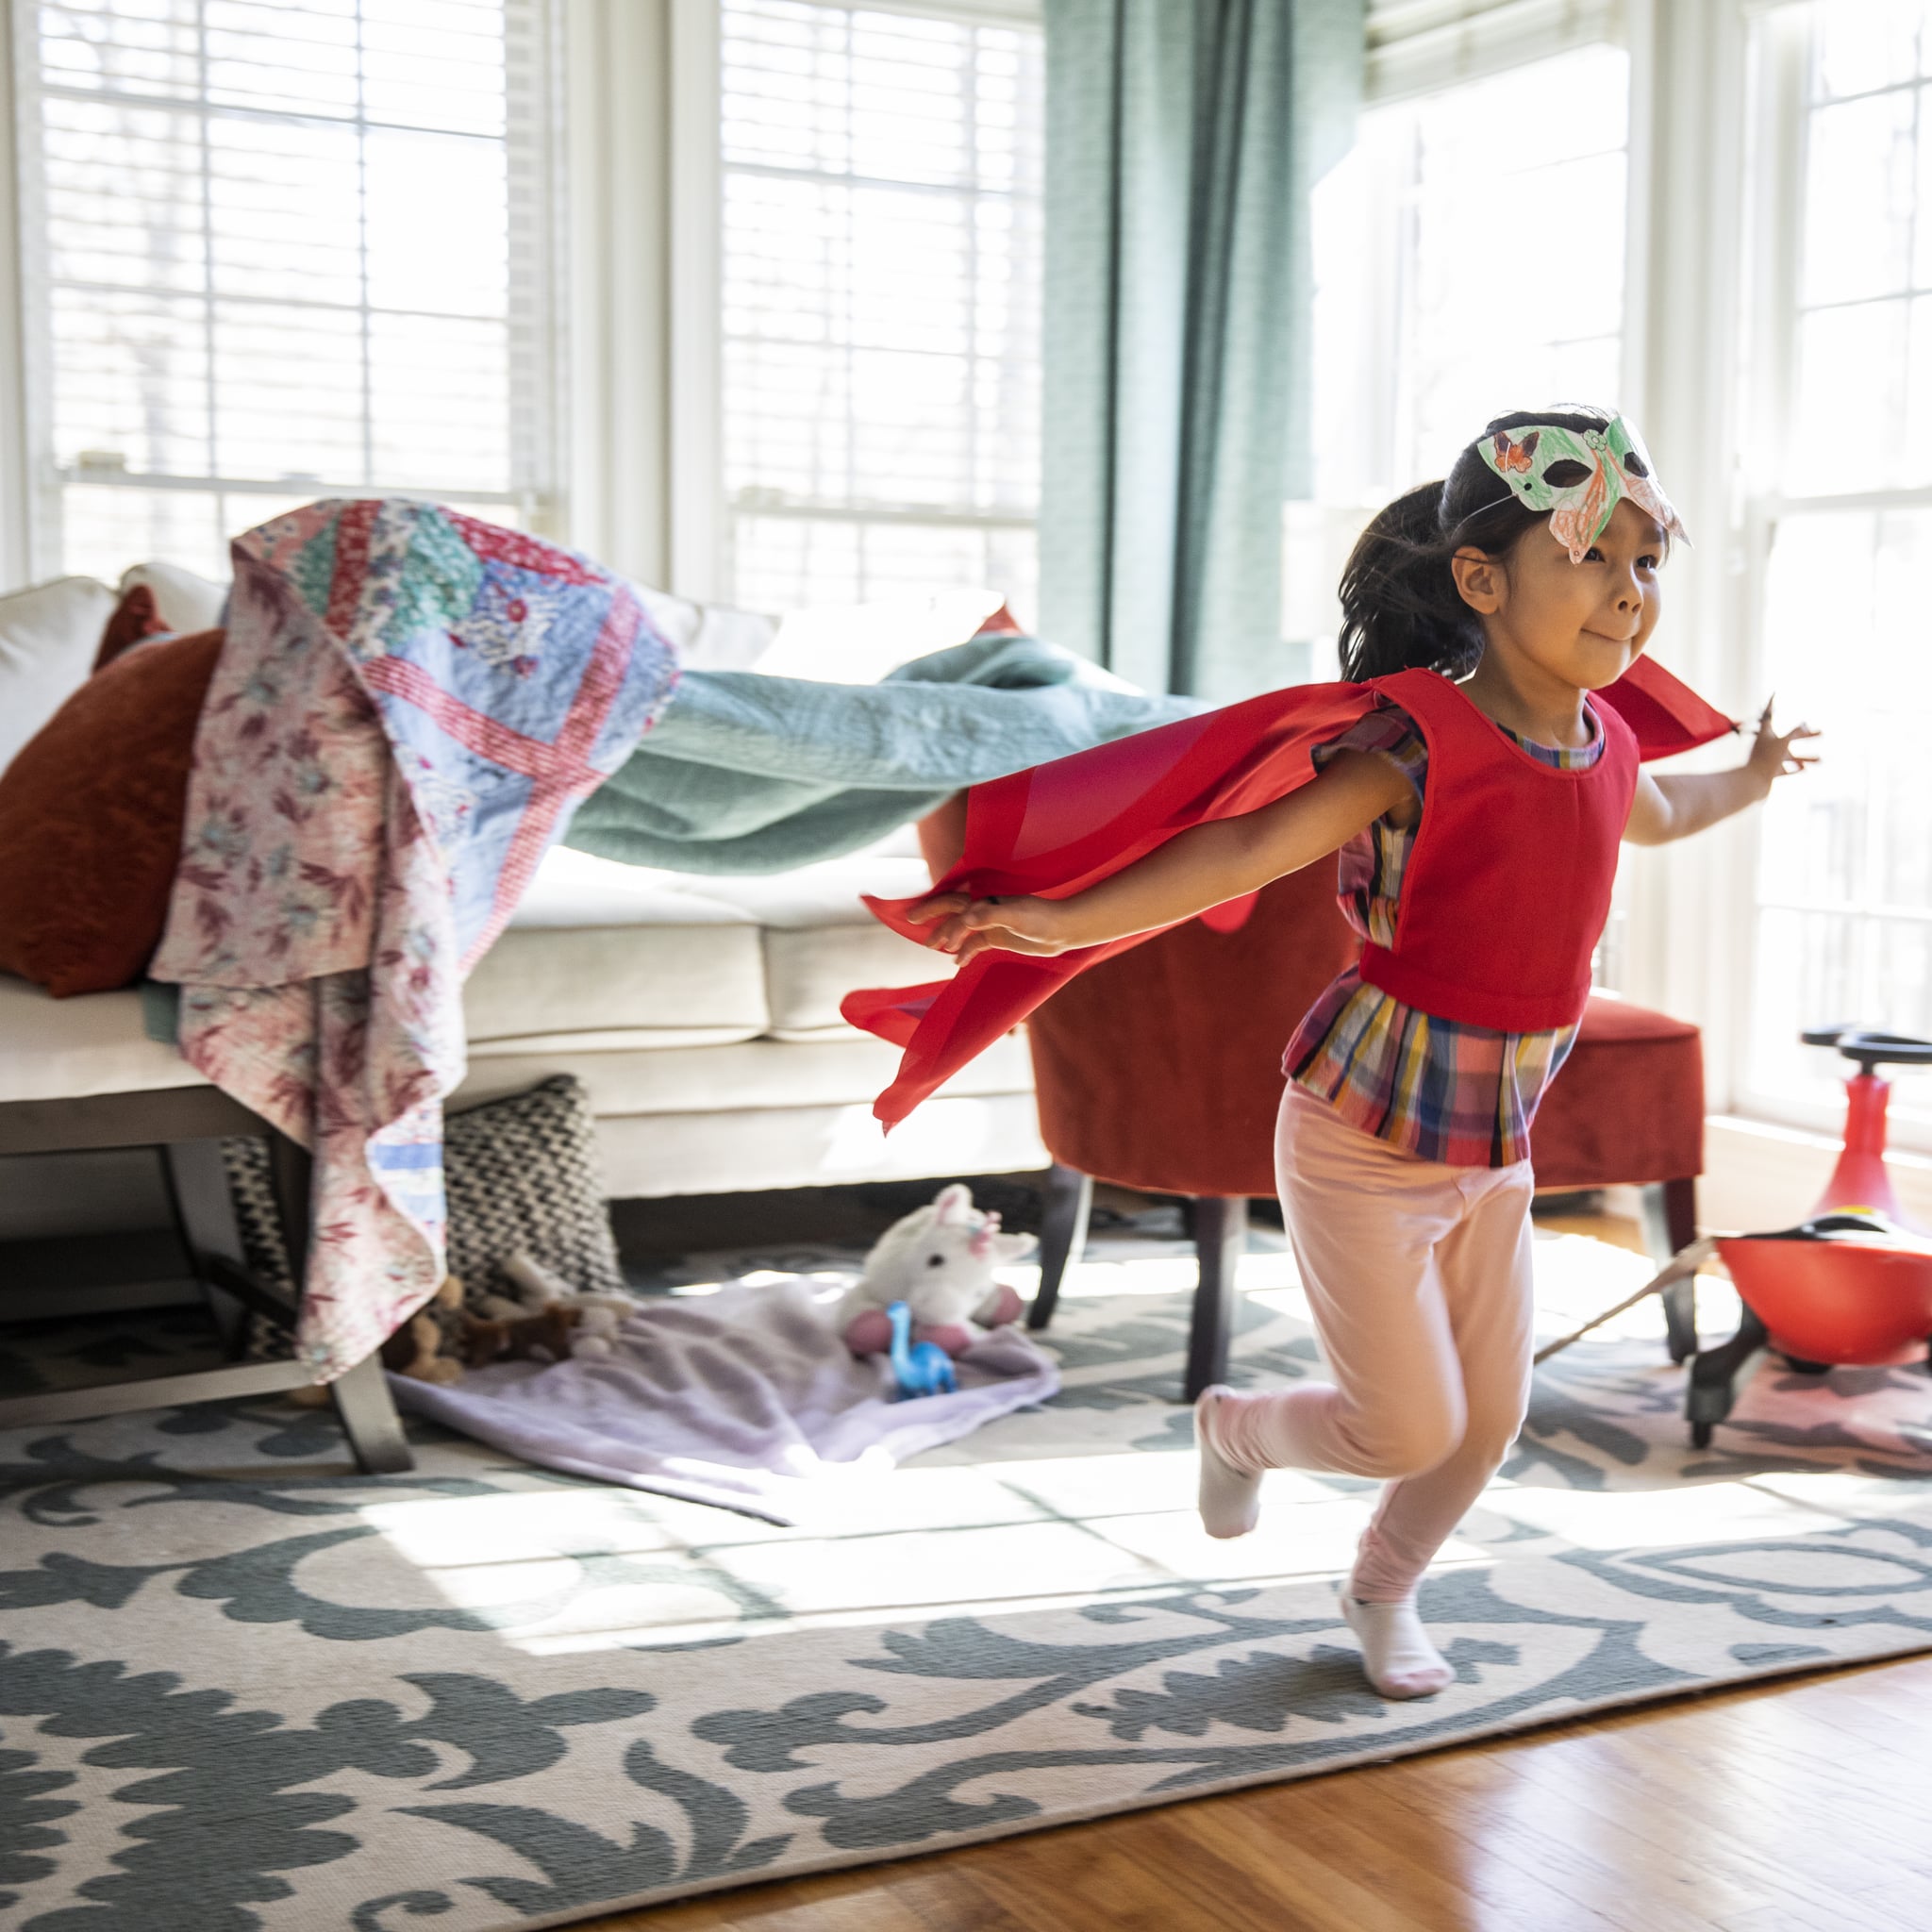 <p>Winter is coming. While bears get to hibernate, parents know toddlers and even older kids do not. Hence, it's peak season for cabin fever. The good news is that plenty of indoor activities for kids offer <a href="https://www.popsugar.com/family/Best-Learning-Toys-44075124" class="ga-track">fun (and even educational) experiences</a>, even if the weather outside is frightful.</p> <p>The bad news: You may not have the energy to muster up ideas for things to do inside - <a href="https://www.popsugar.com/family/how-to-enjoy-holidays-more-as-parent-46989272" class="ga-track">with the holiday whirl</a> and the hustle and bustle of work beckoning. Allow us to lend a hand. From top indoor activities for toddlers with energy to burn to weather-proof experiences for older kids, there's something on this list for children of all ages. These indoor activities for families will make even days with the worst weather delightful.</p>